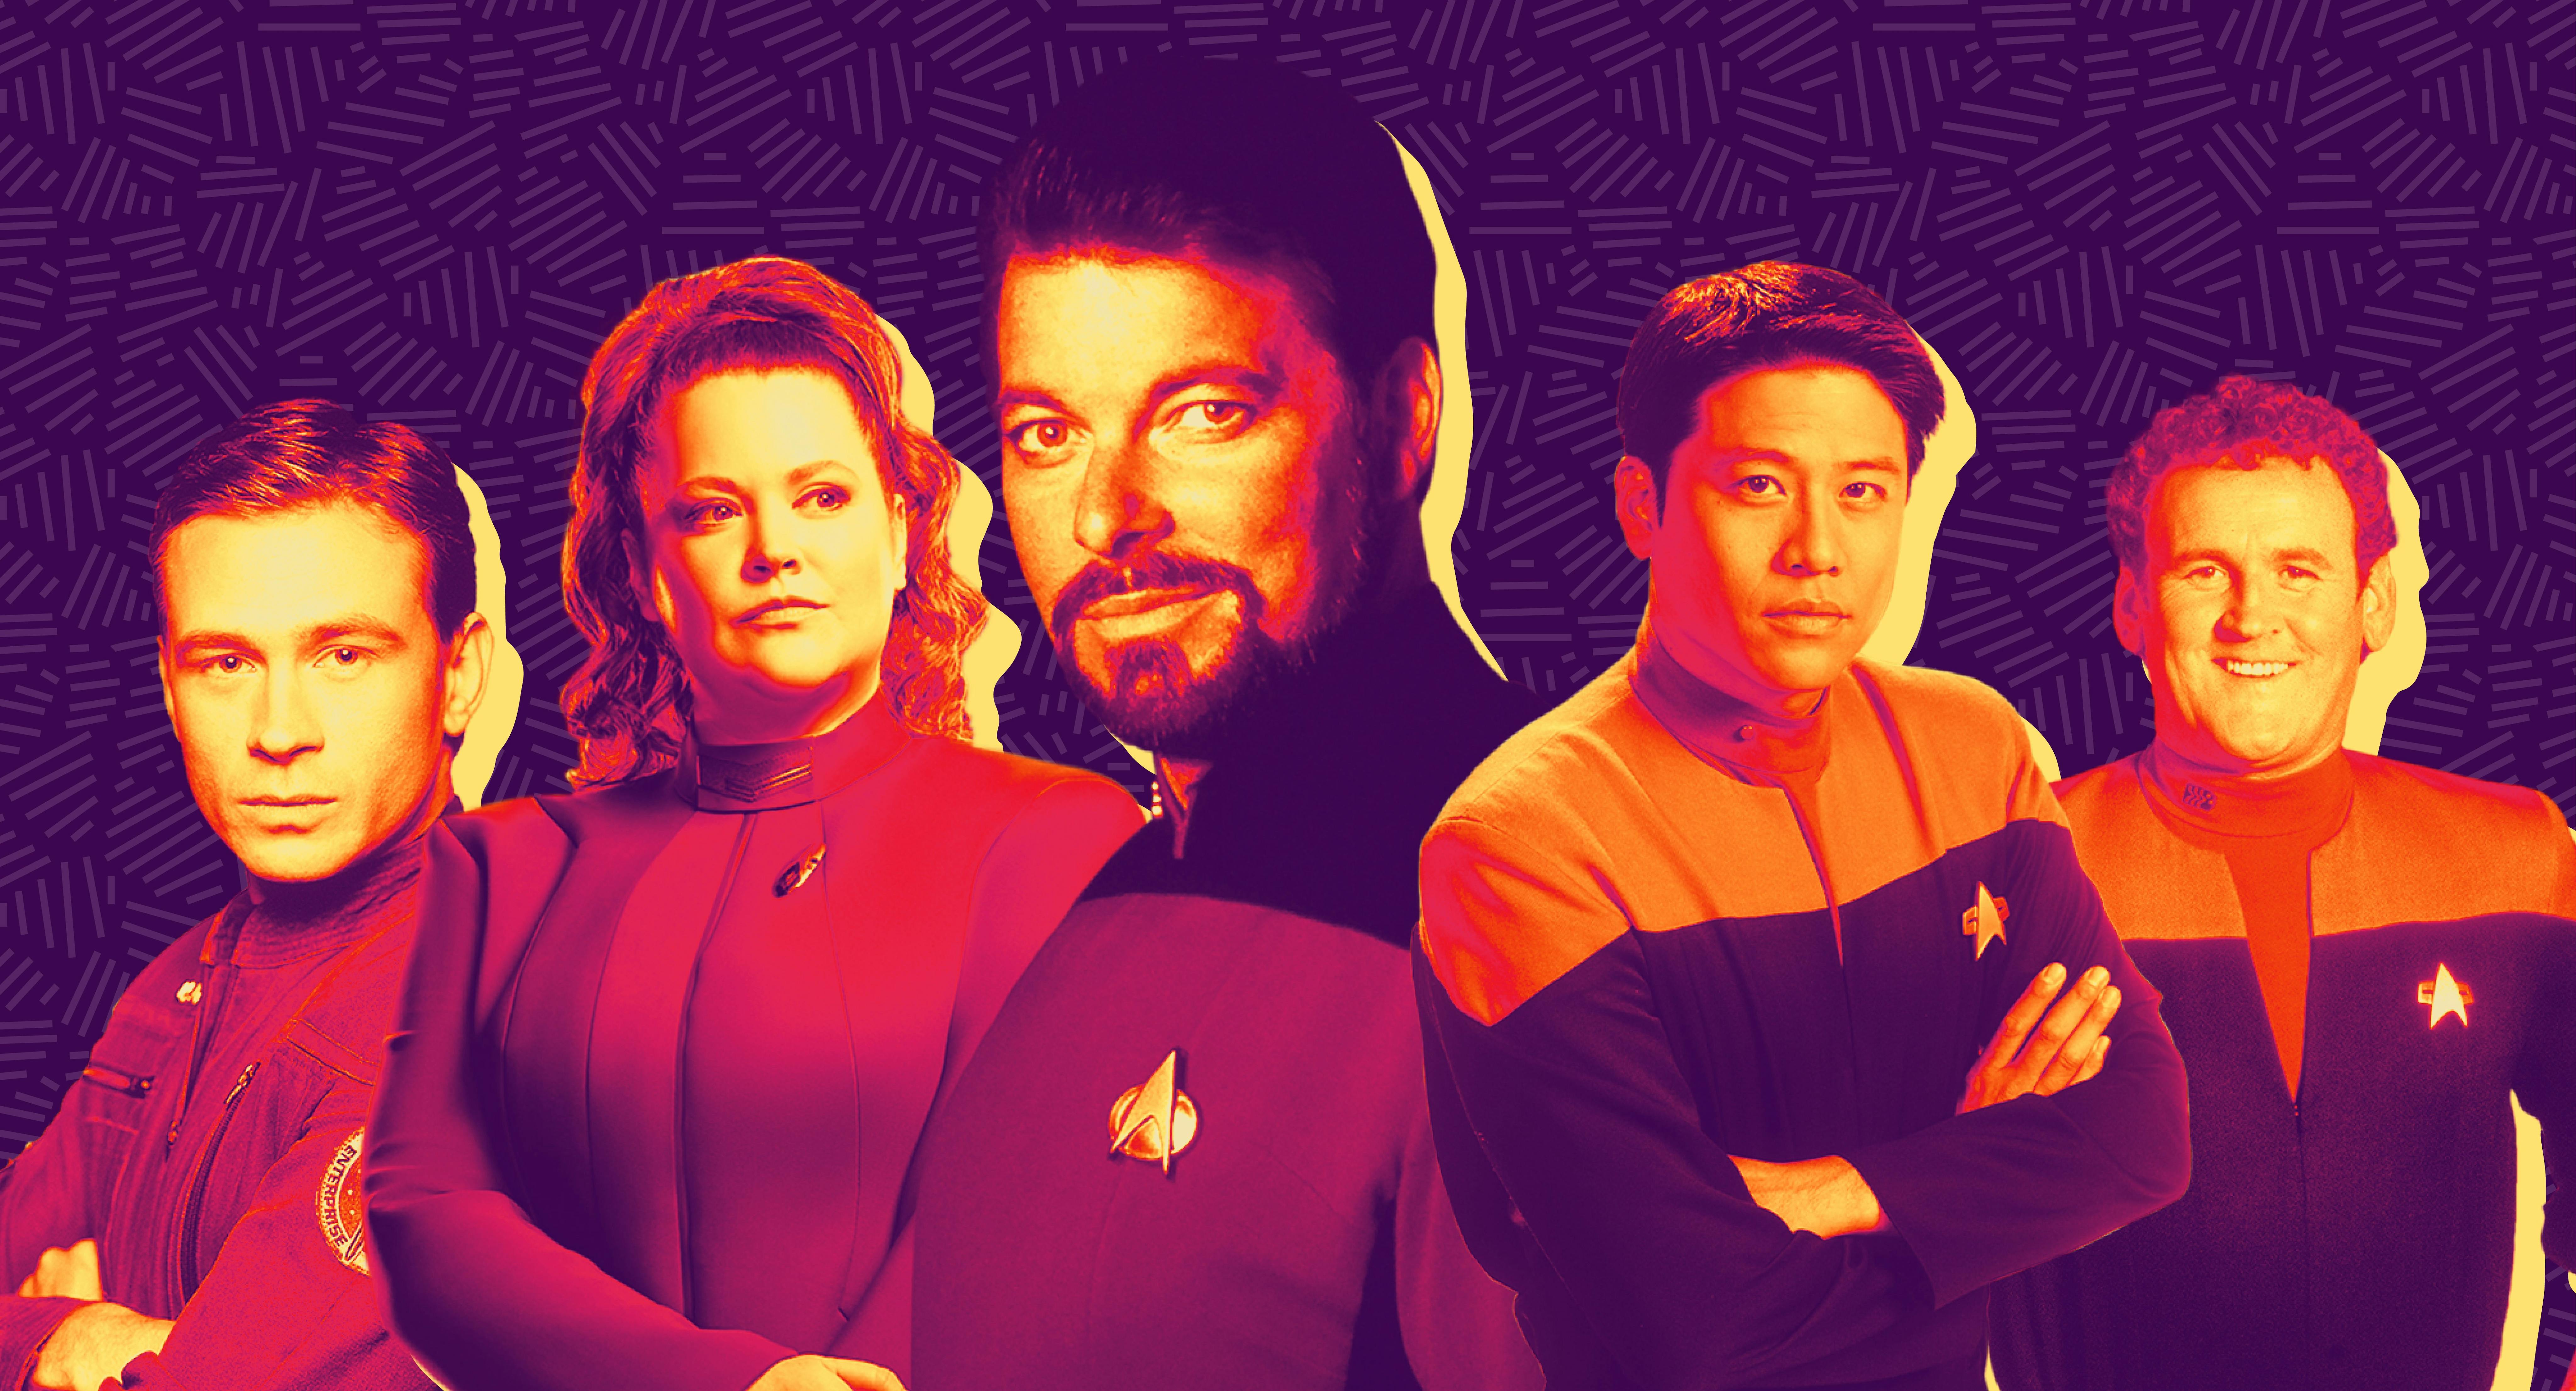 Photos of Trip, Tilly, Riker, Harry Kim, and O'Brien are against a purple background.